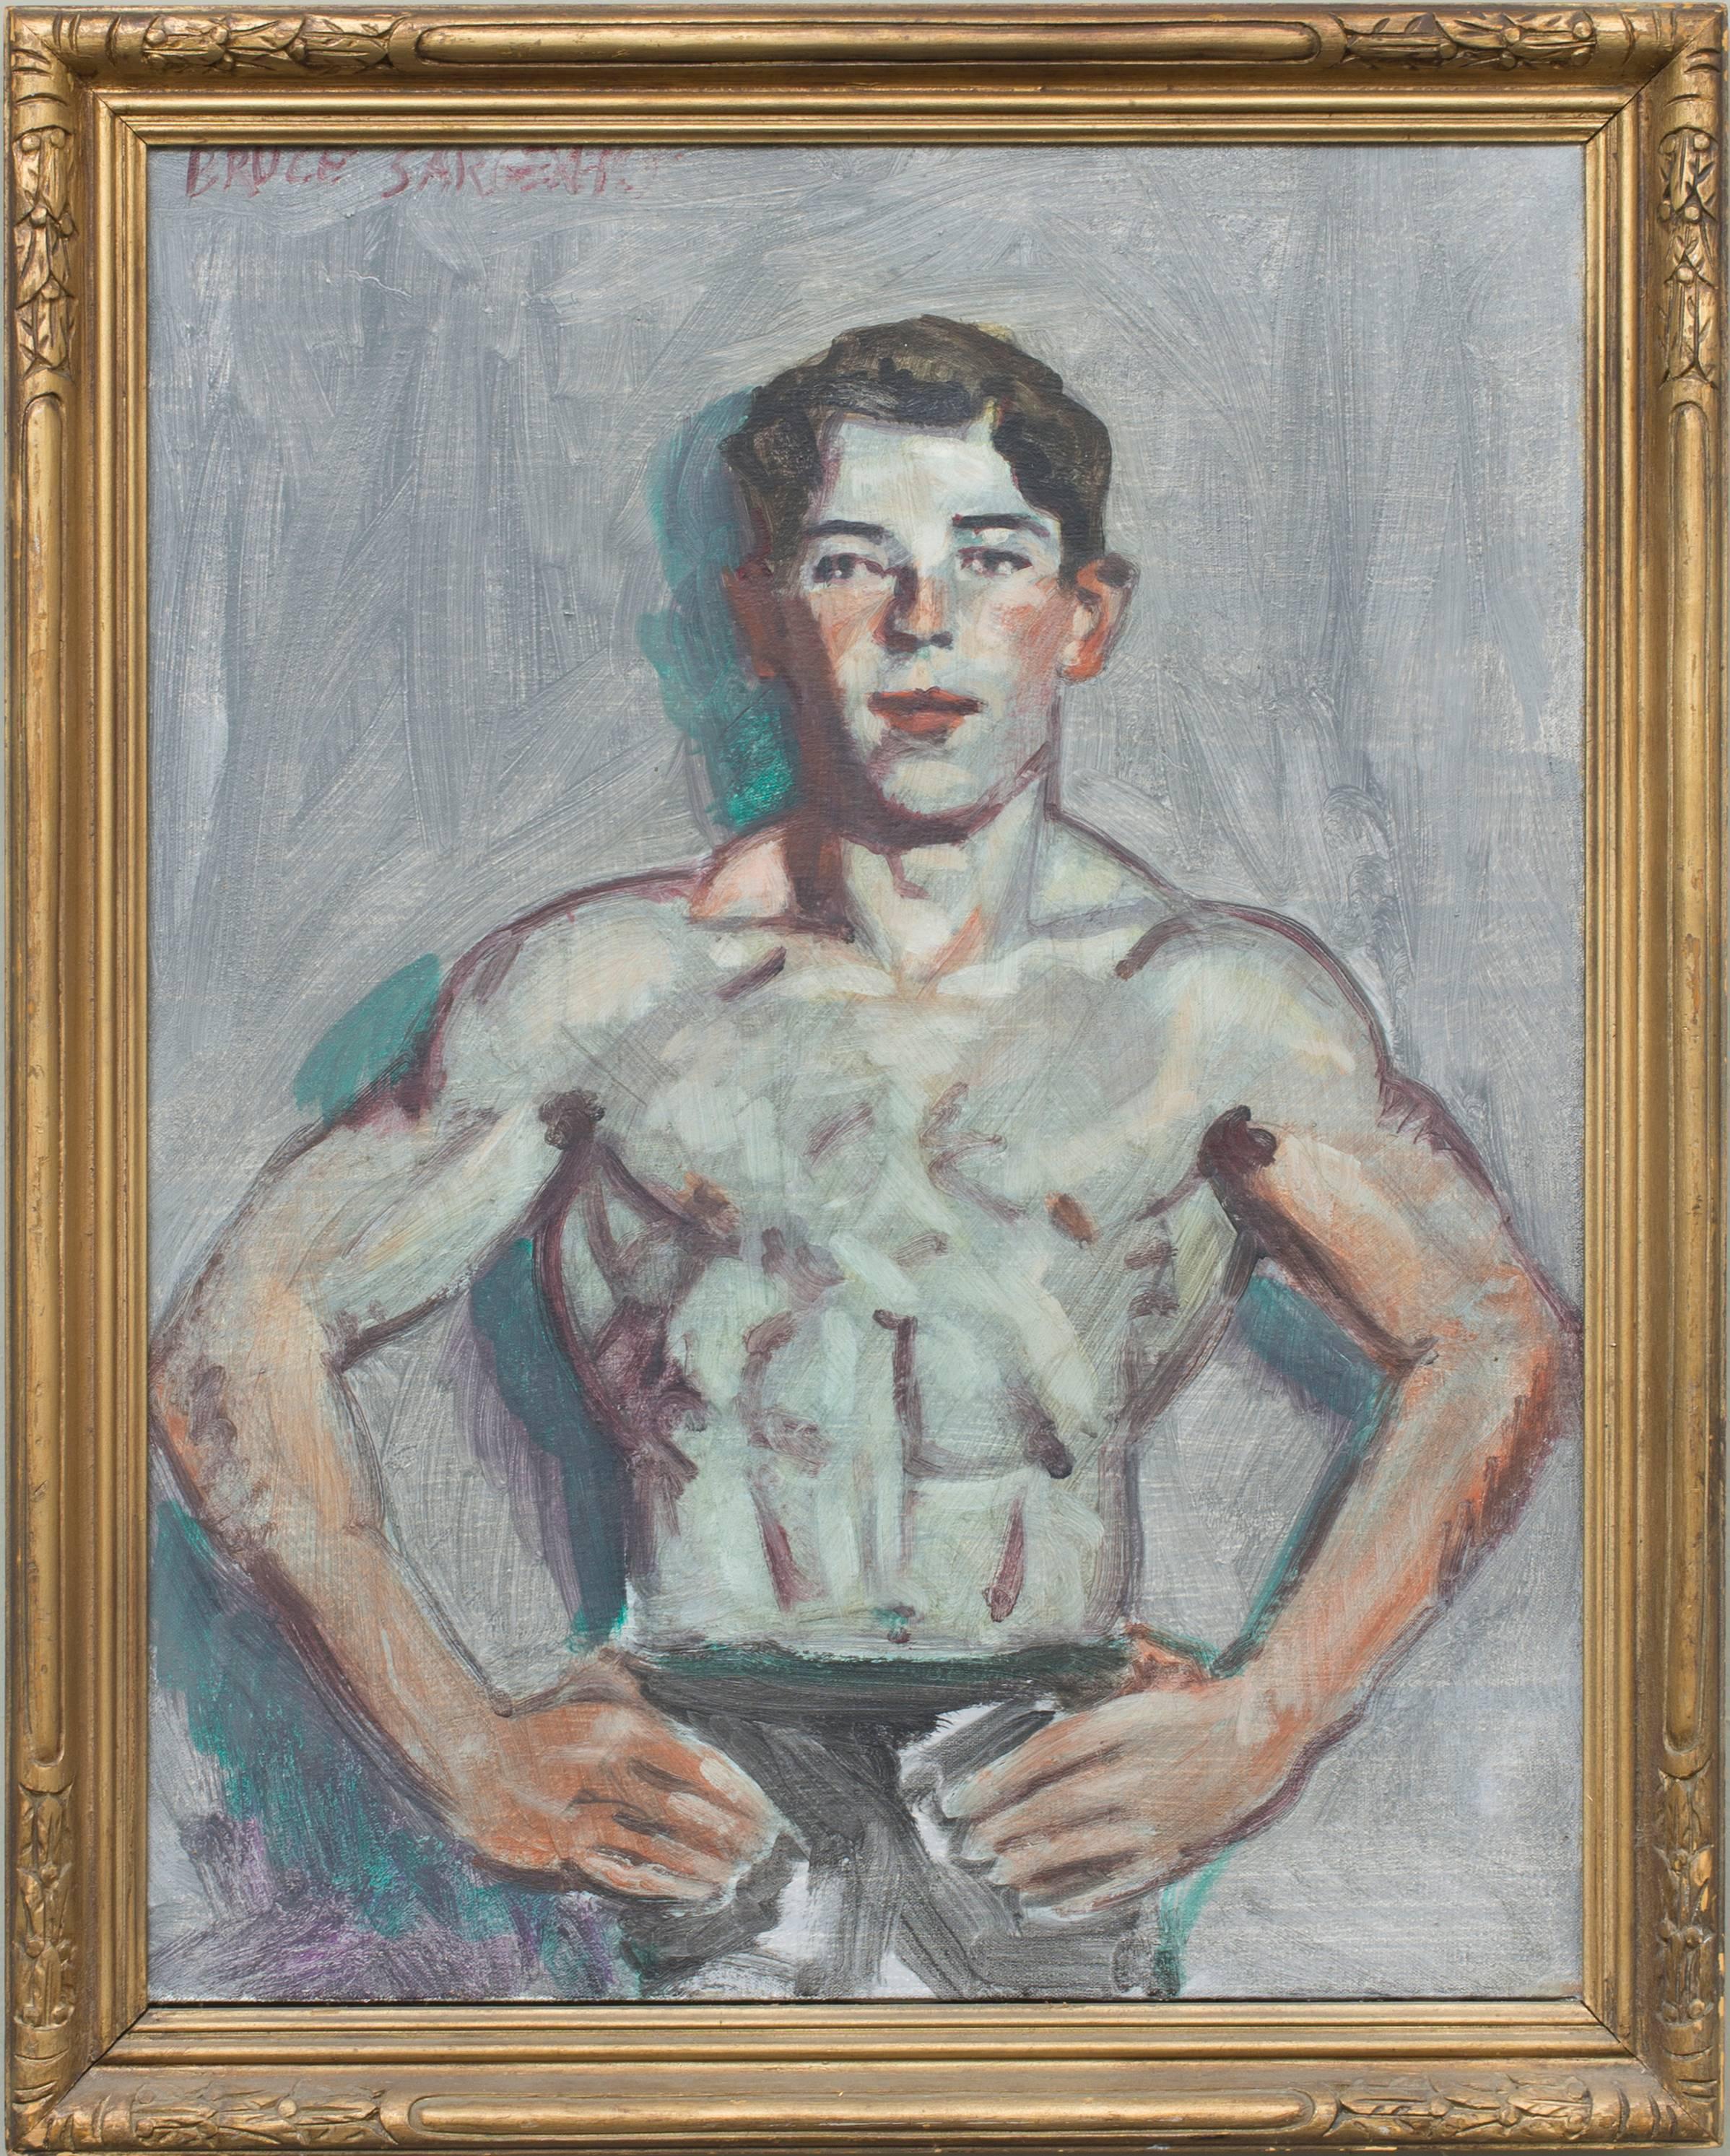 Young Swimmer (Modern, Academic Style Portrait Painting in Antique Gold Frame)